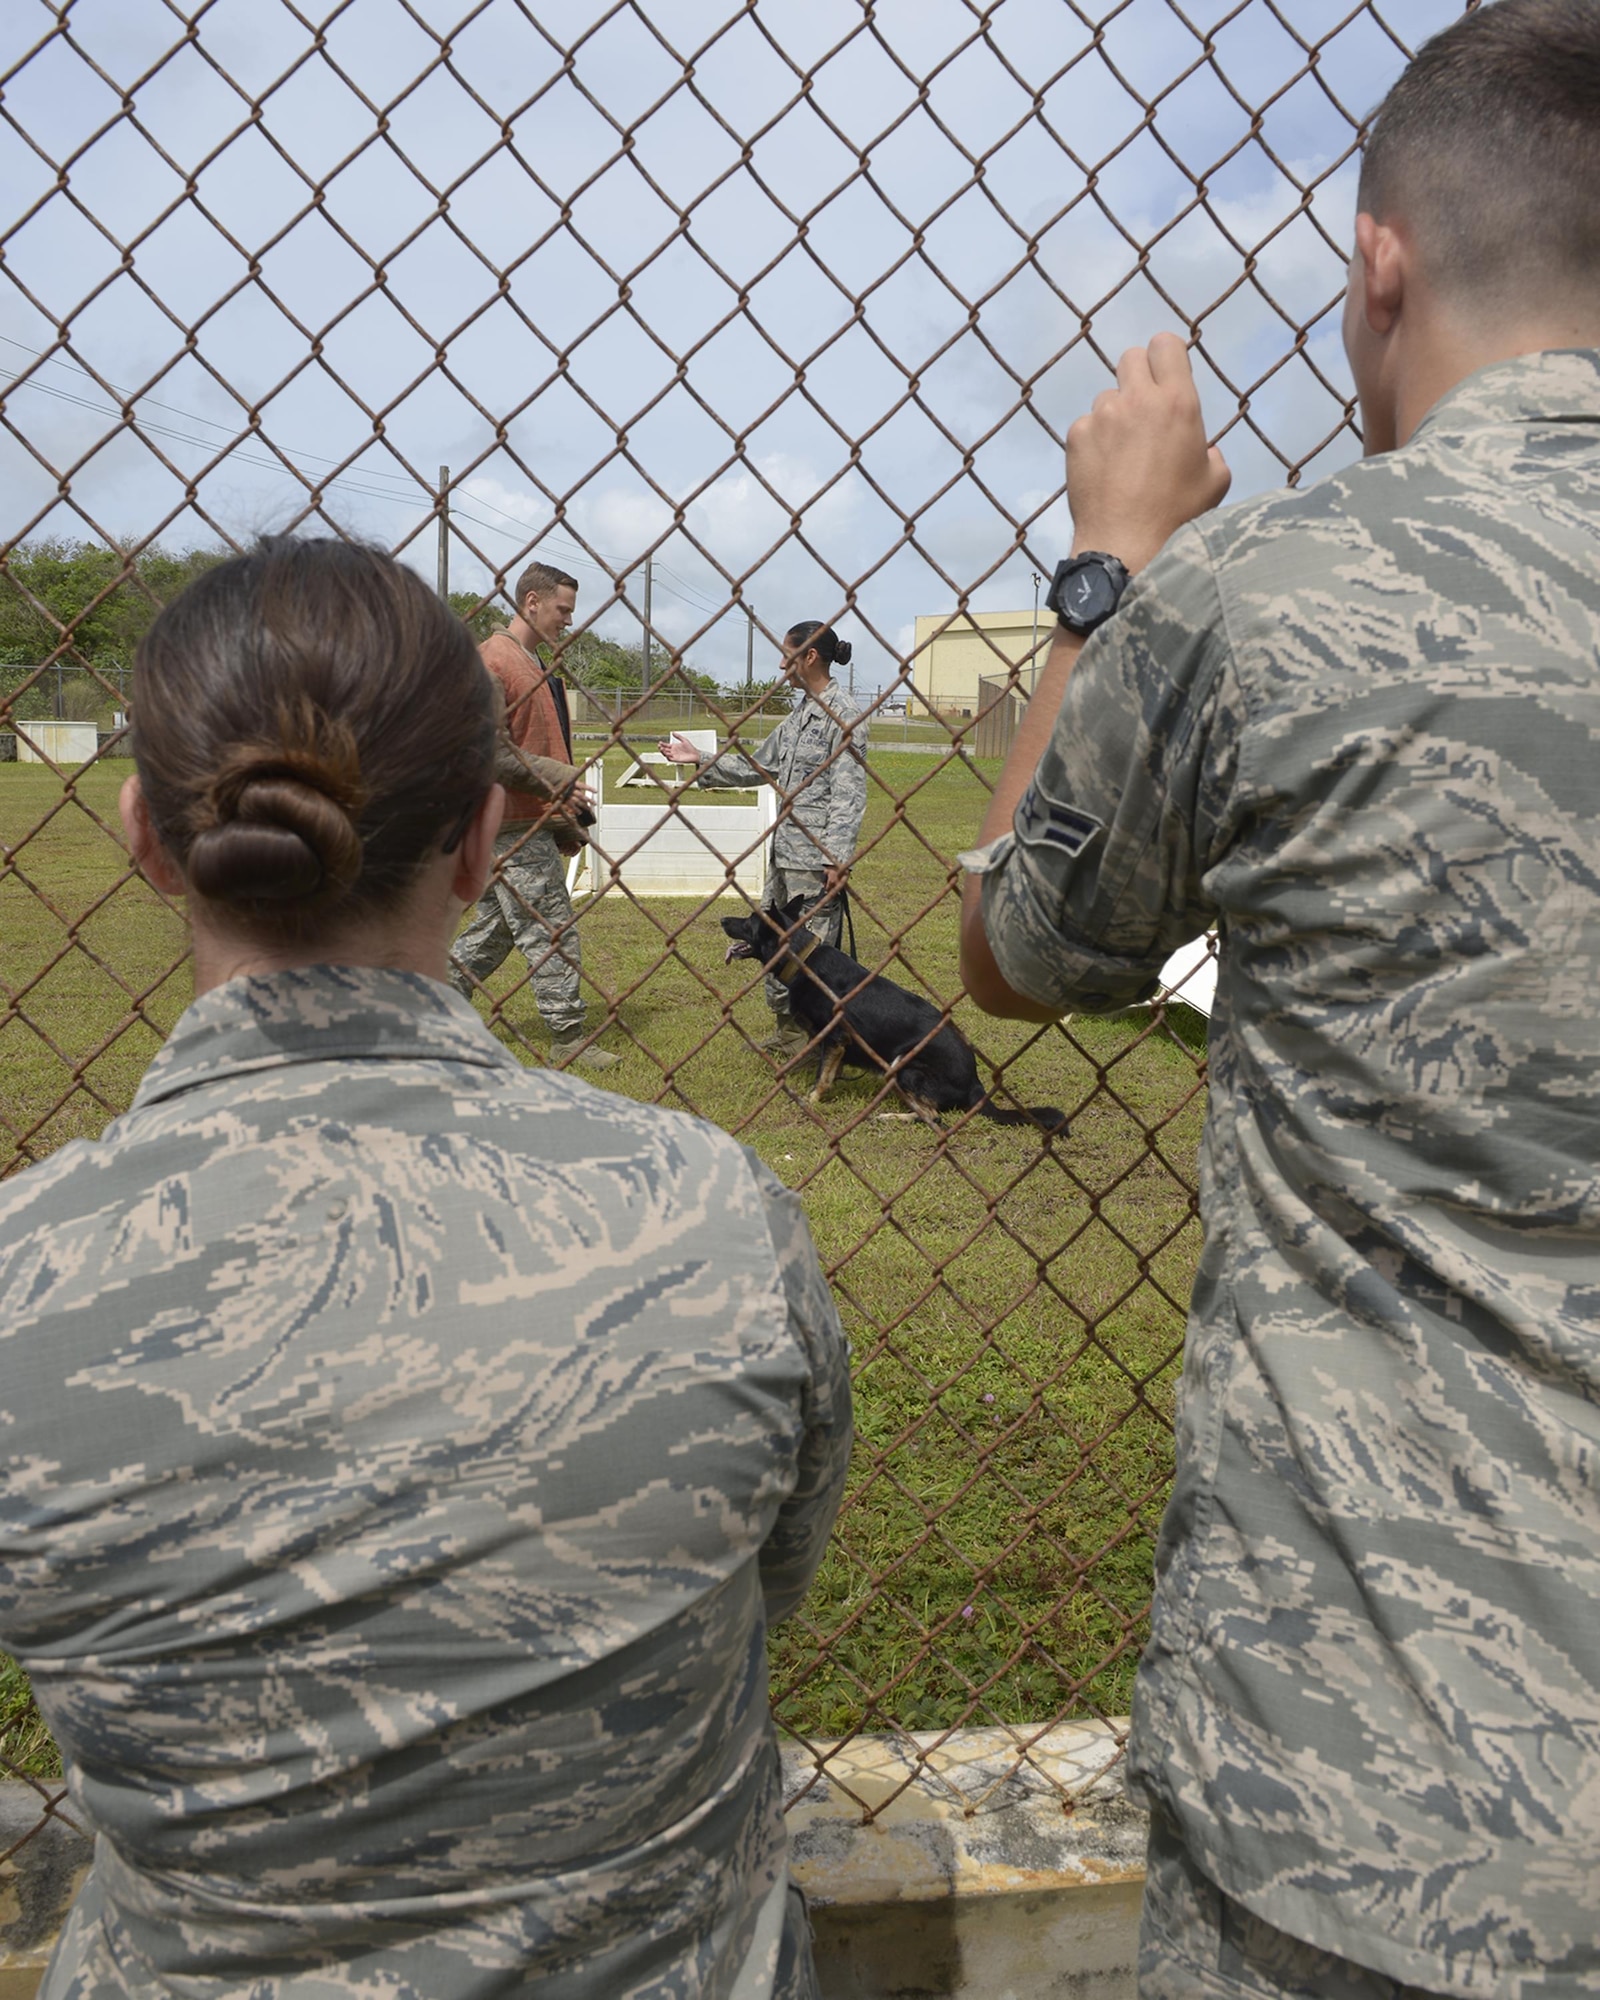 Airmen from the First Term Airmen Center watch a Military Working Dog demonstration during the Pacific Air Power Tour, May 15, 2017, at Andersen Air Force Base, Guam. The purpose of the tour is to introduce new Airmen to various career fields that play a role in getting the mission done. (U.S. Air Force photo by Senior Airman Cierra Presentado/Released)